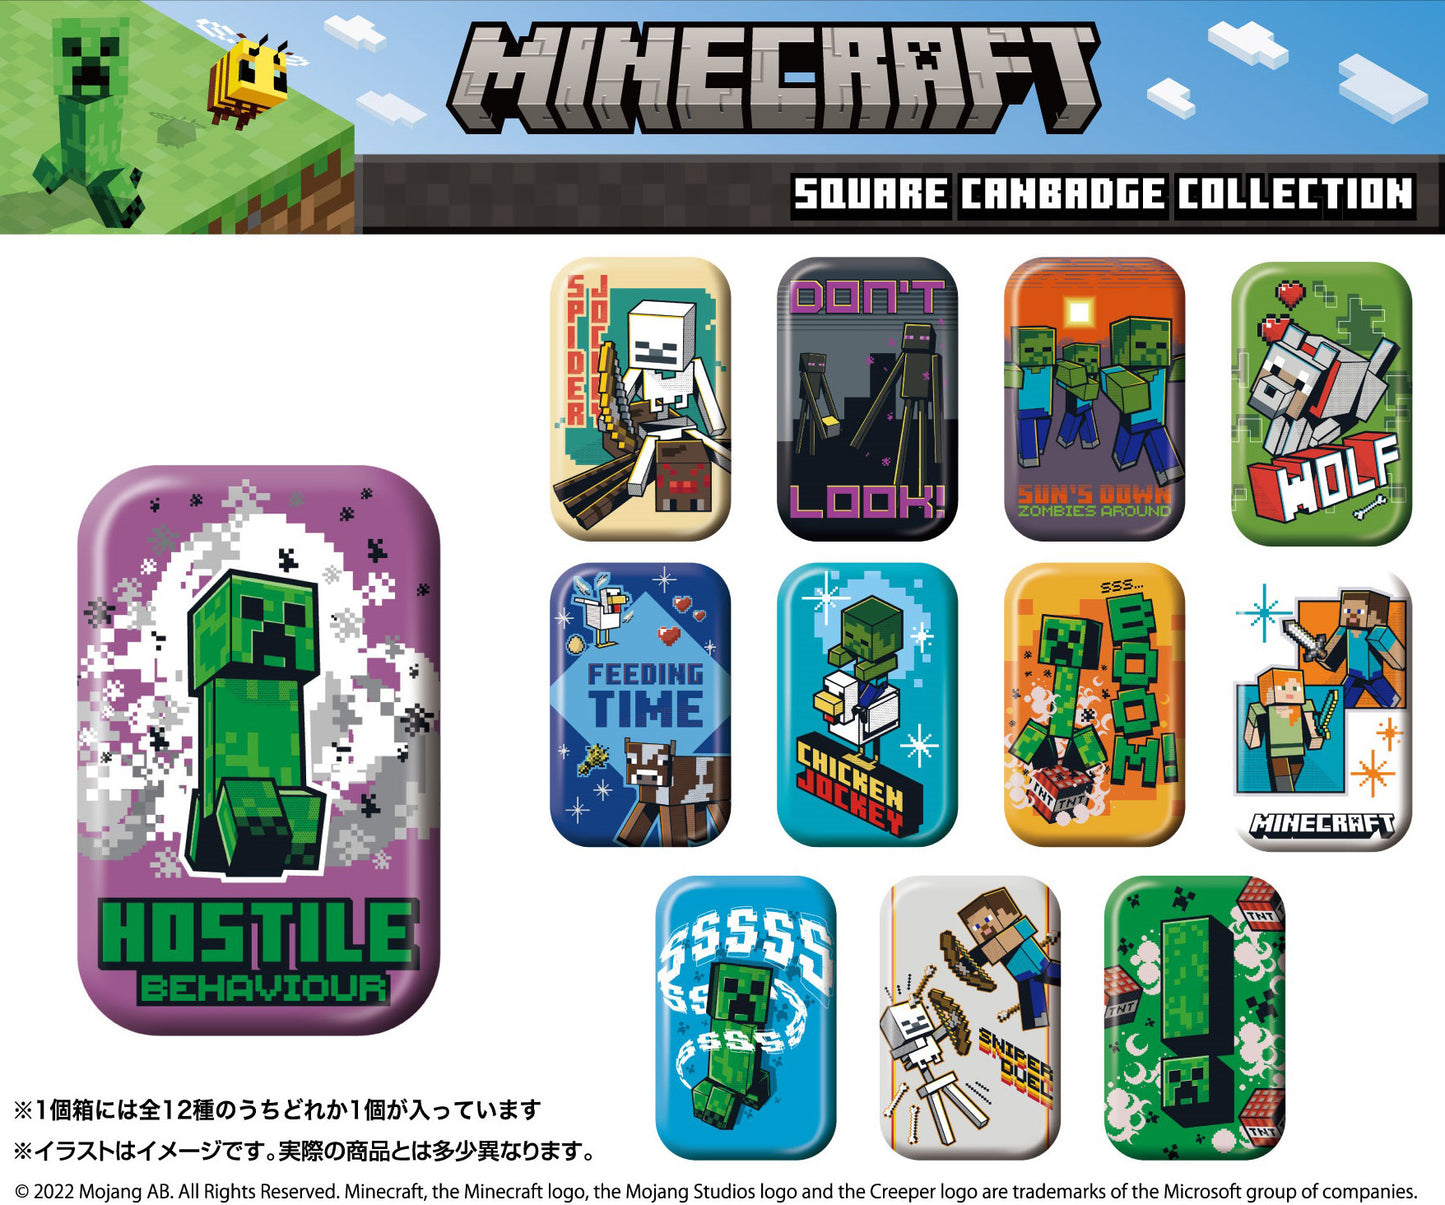 "Minecraft" Square Can Badge Collection - Aniporium